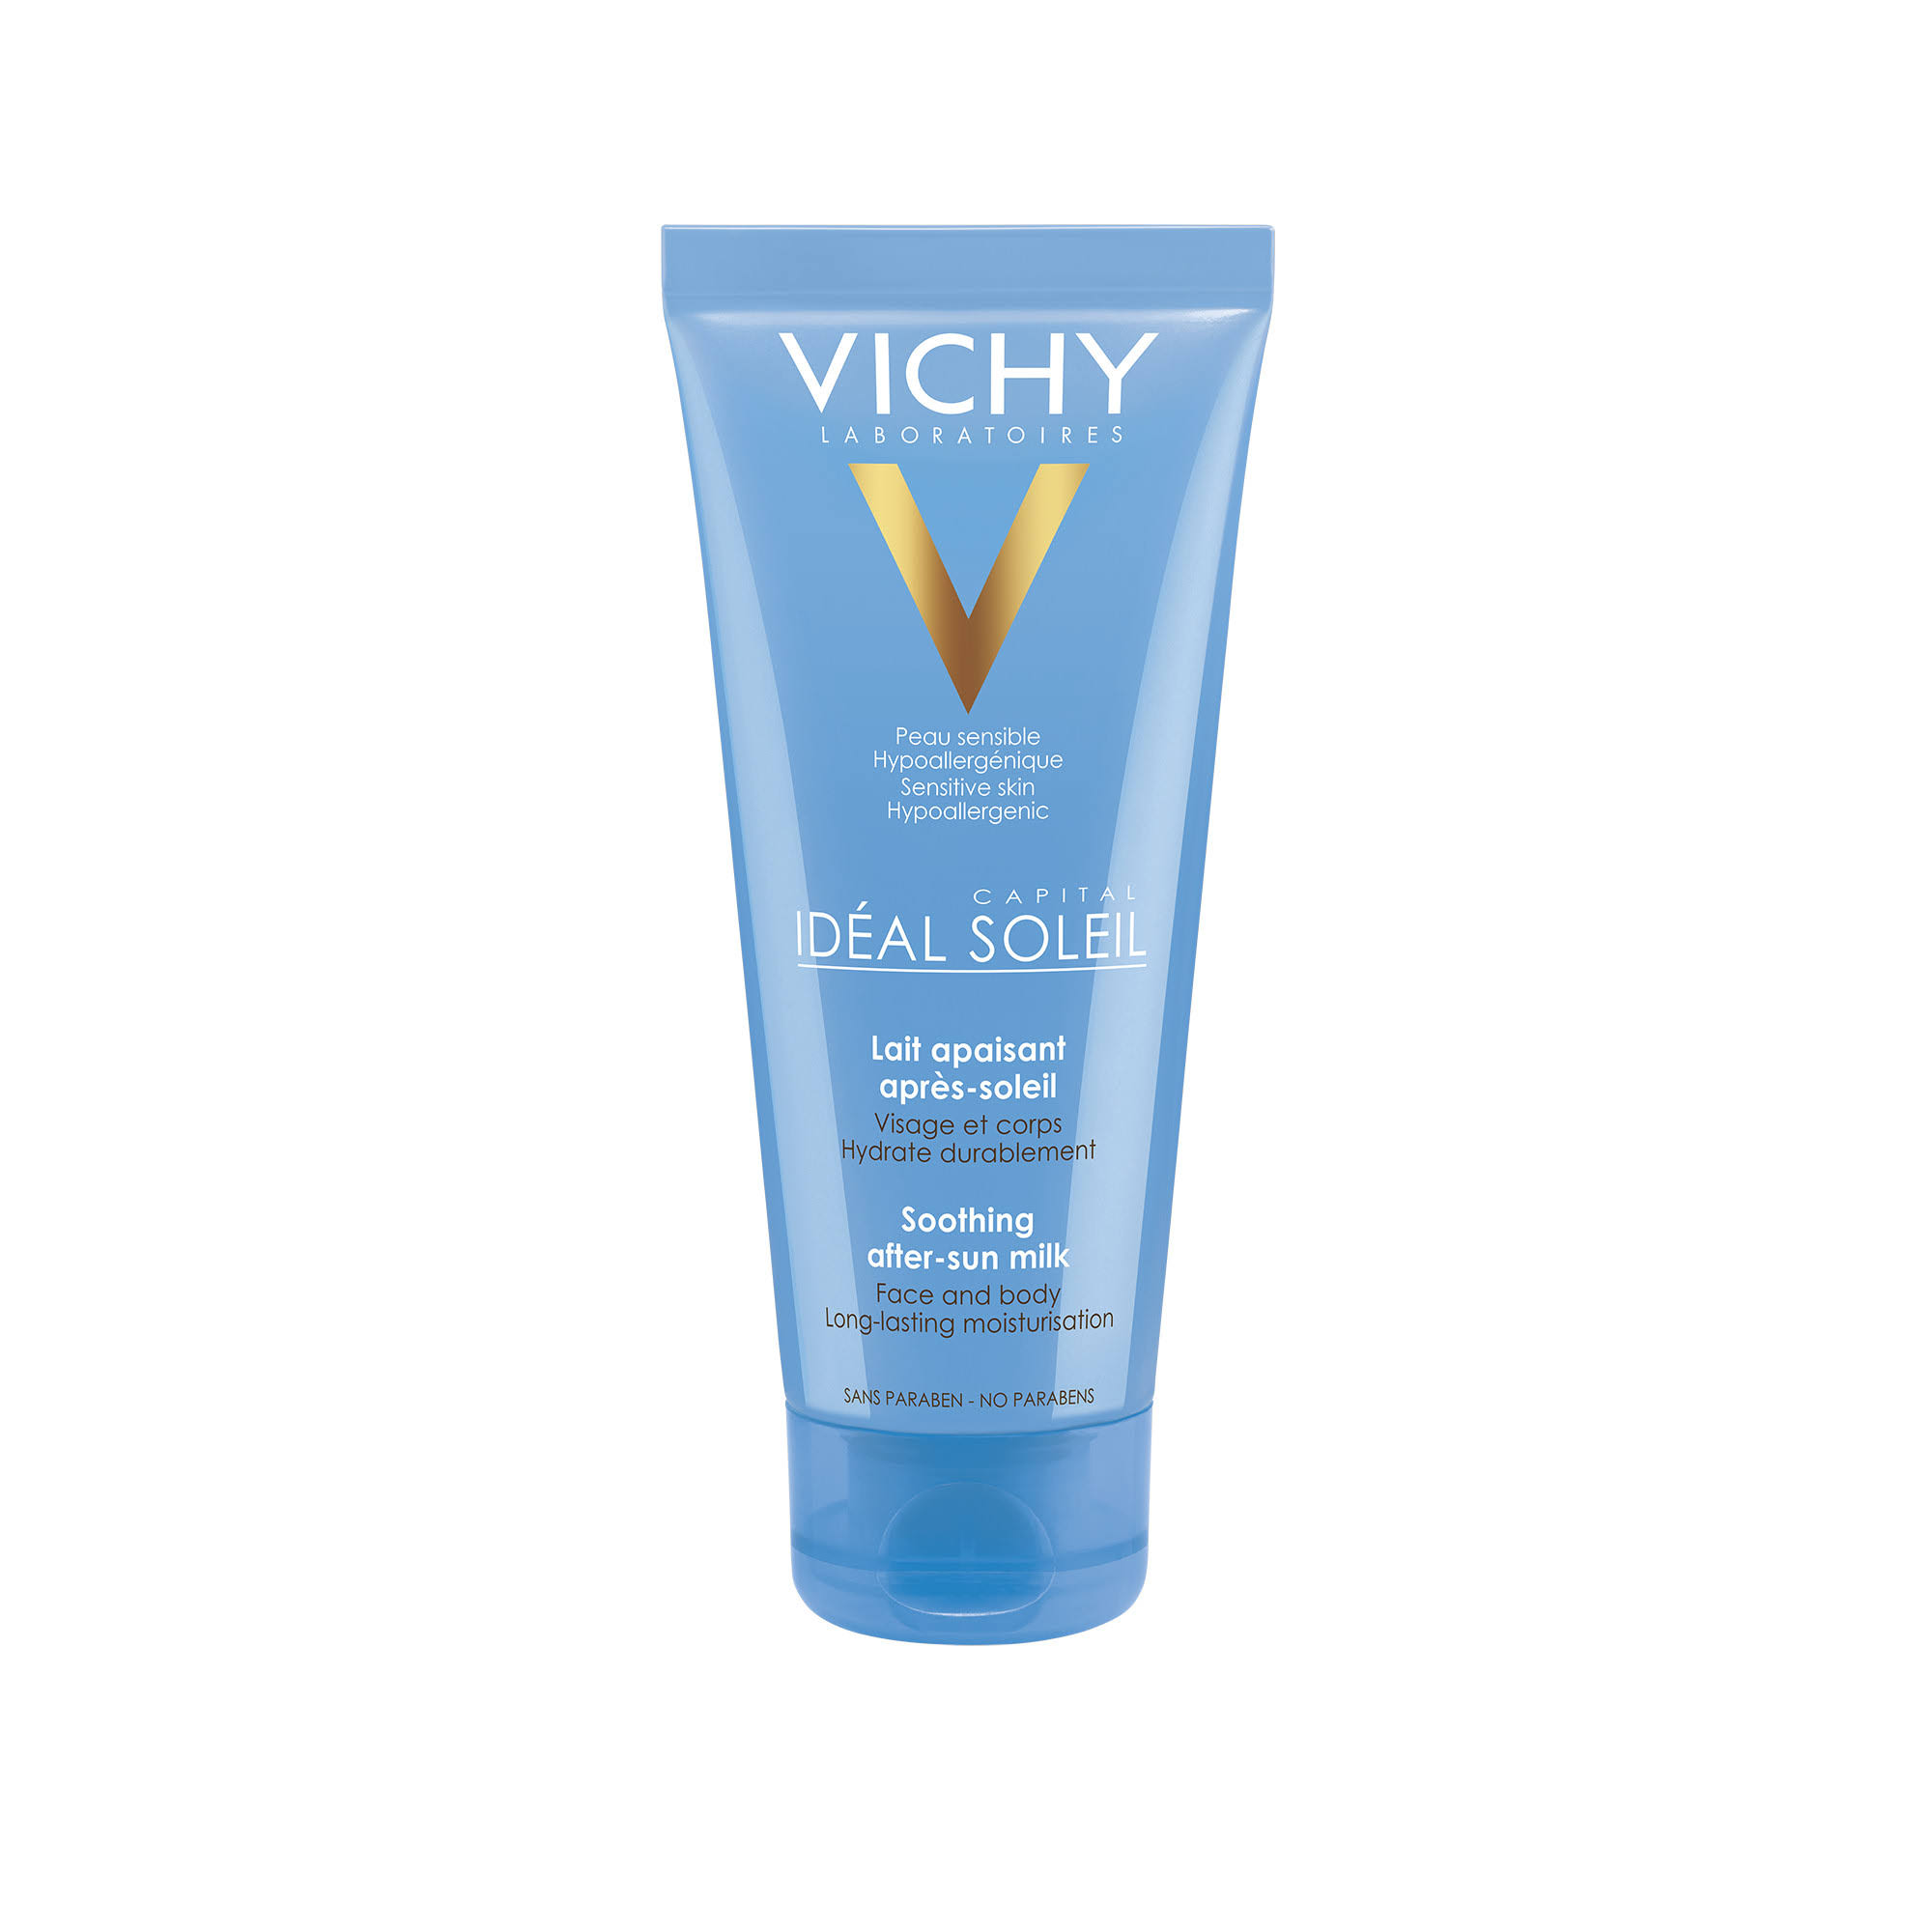 Vichy Ideal Soleil Soothing After-Sun Milk - 300ml